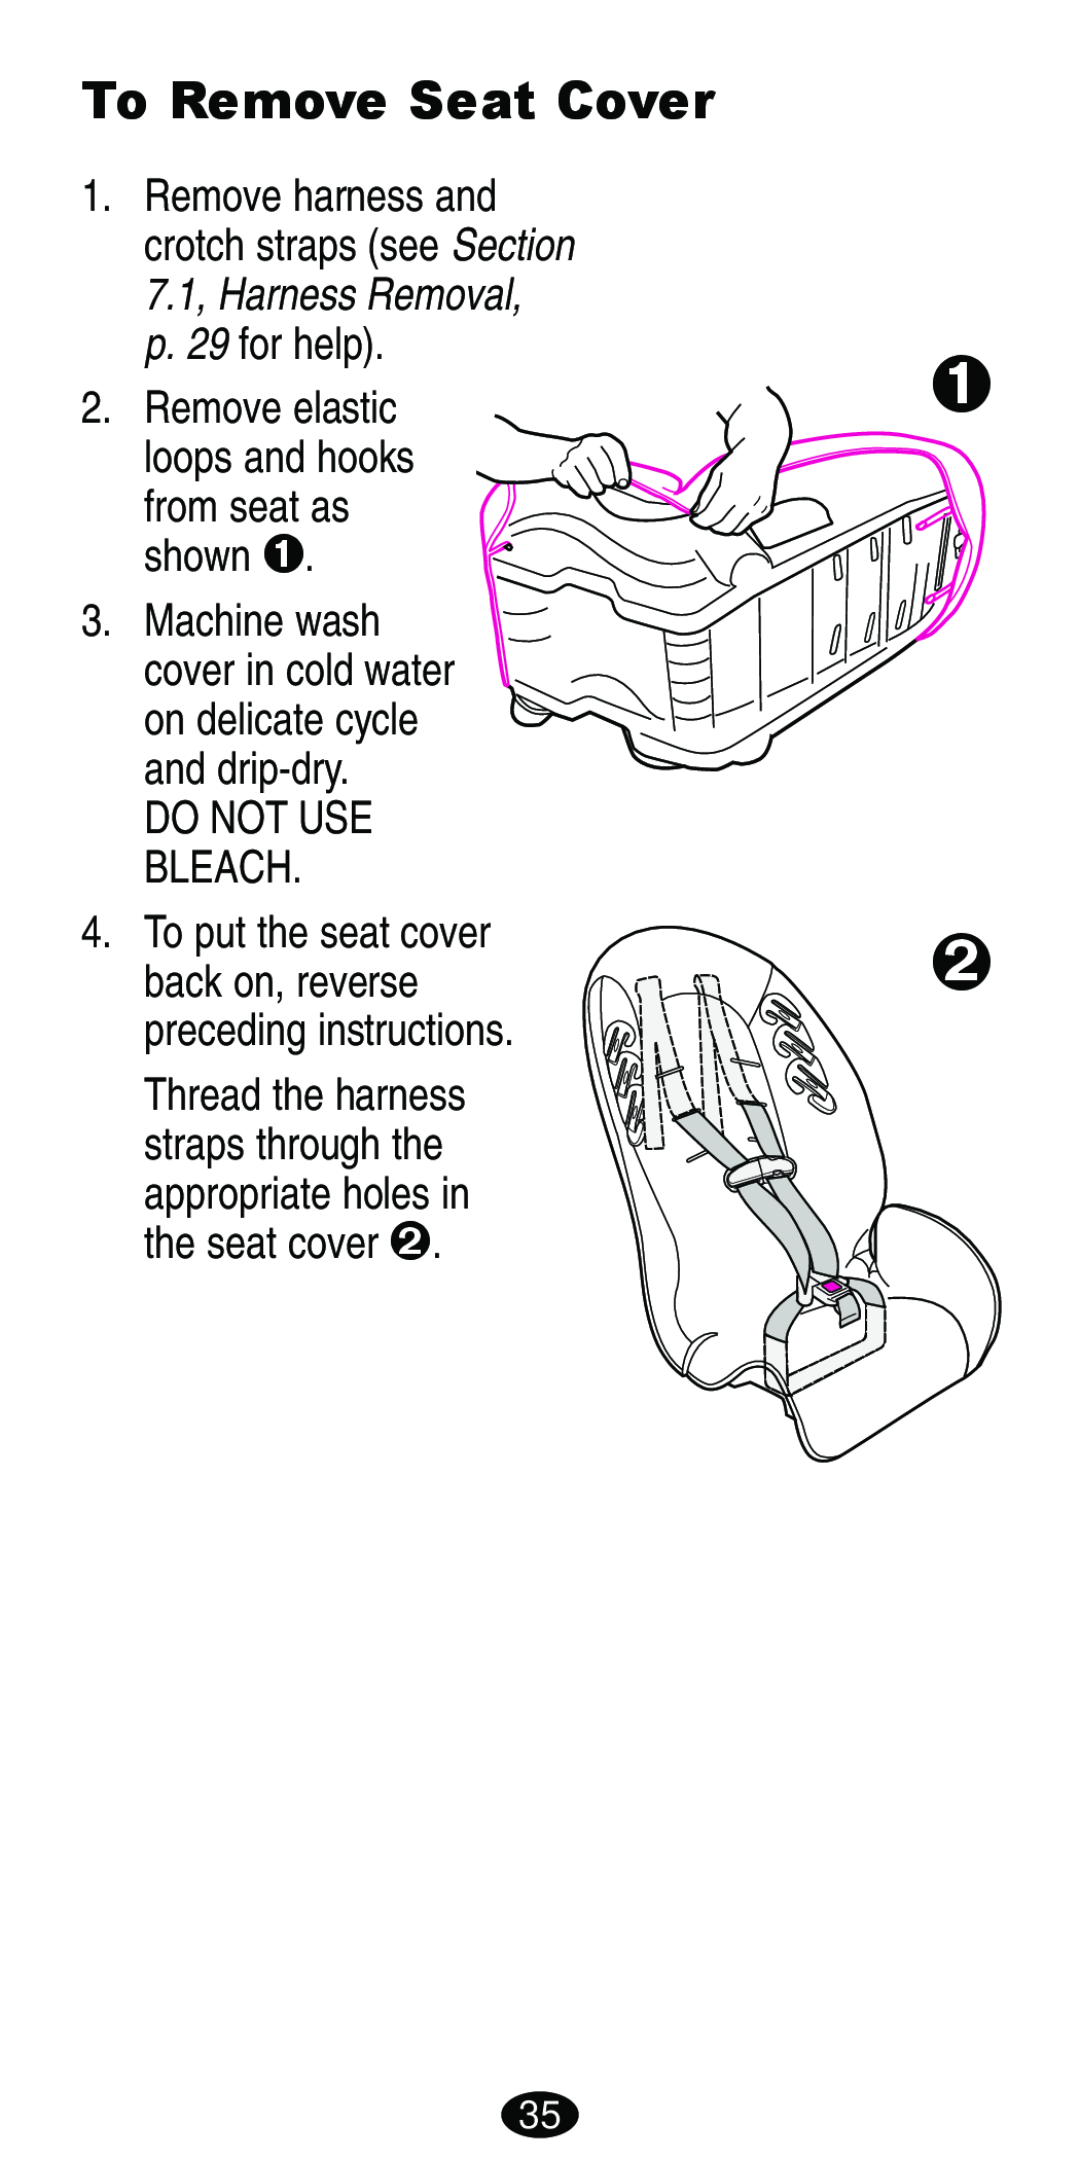 Graco Car Seat/Booster To Remove Seat Cover, Remove elastic, preceding instructions, loops and hooks from seat as shown ™ 